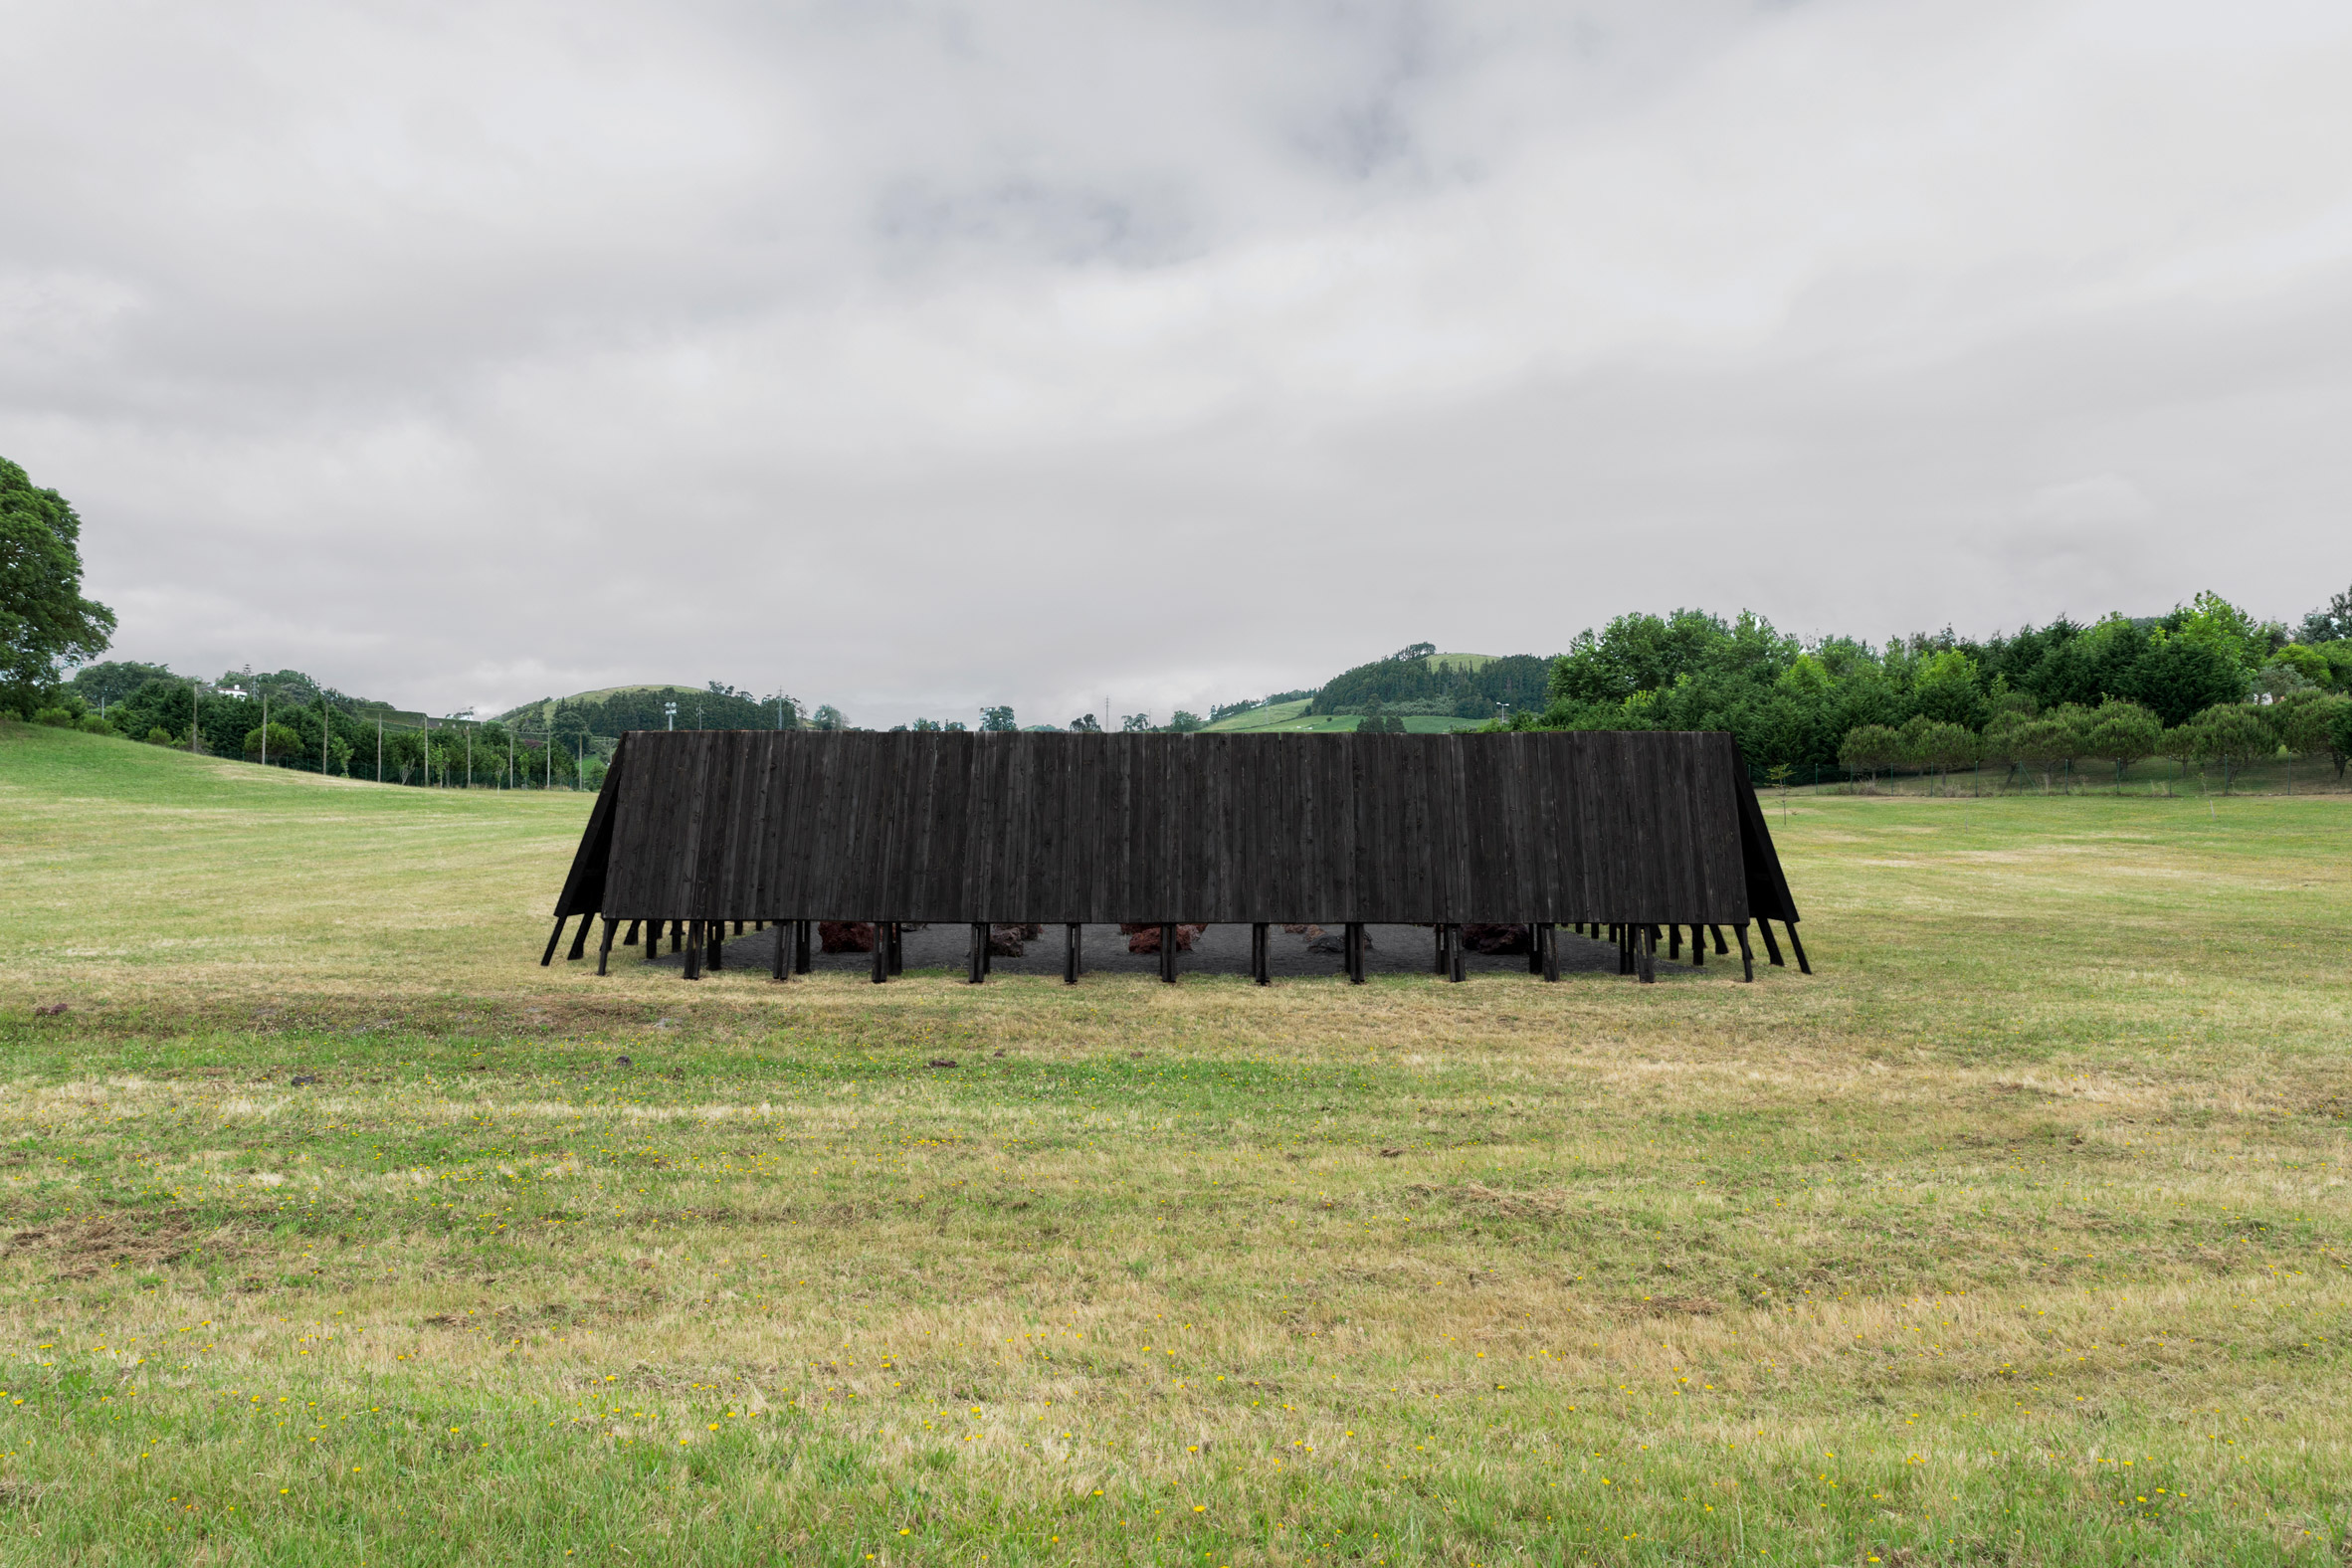 The charred exterior of the Inbetween Pavilion by Pontoatelier